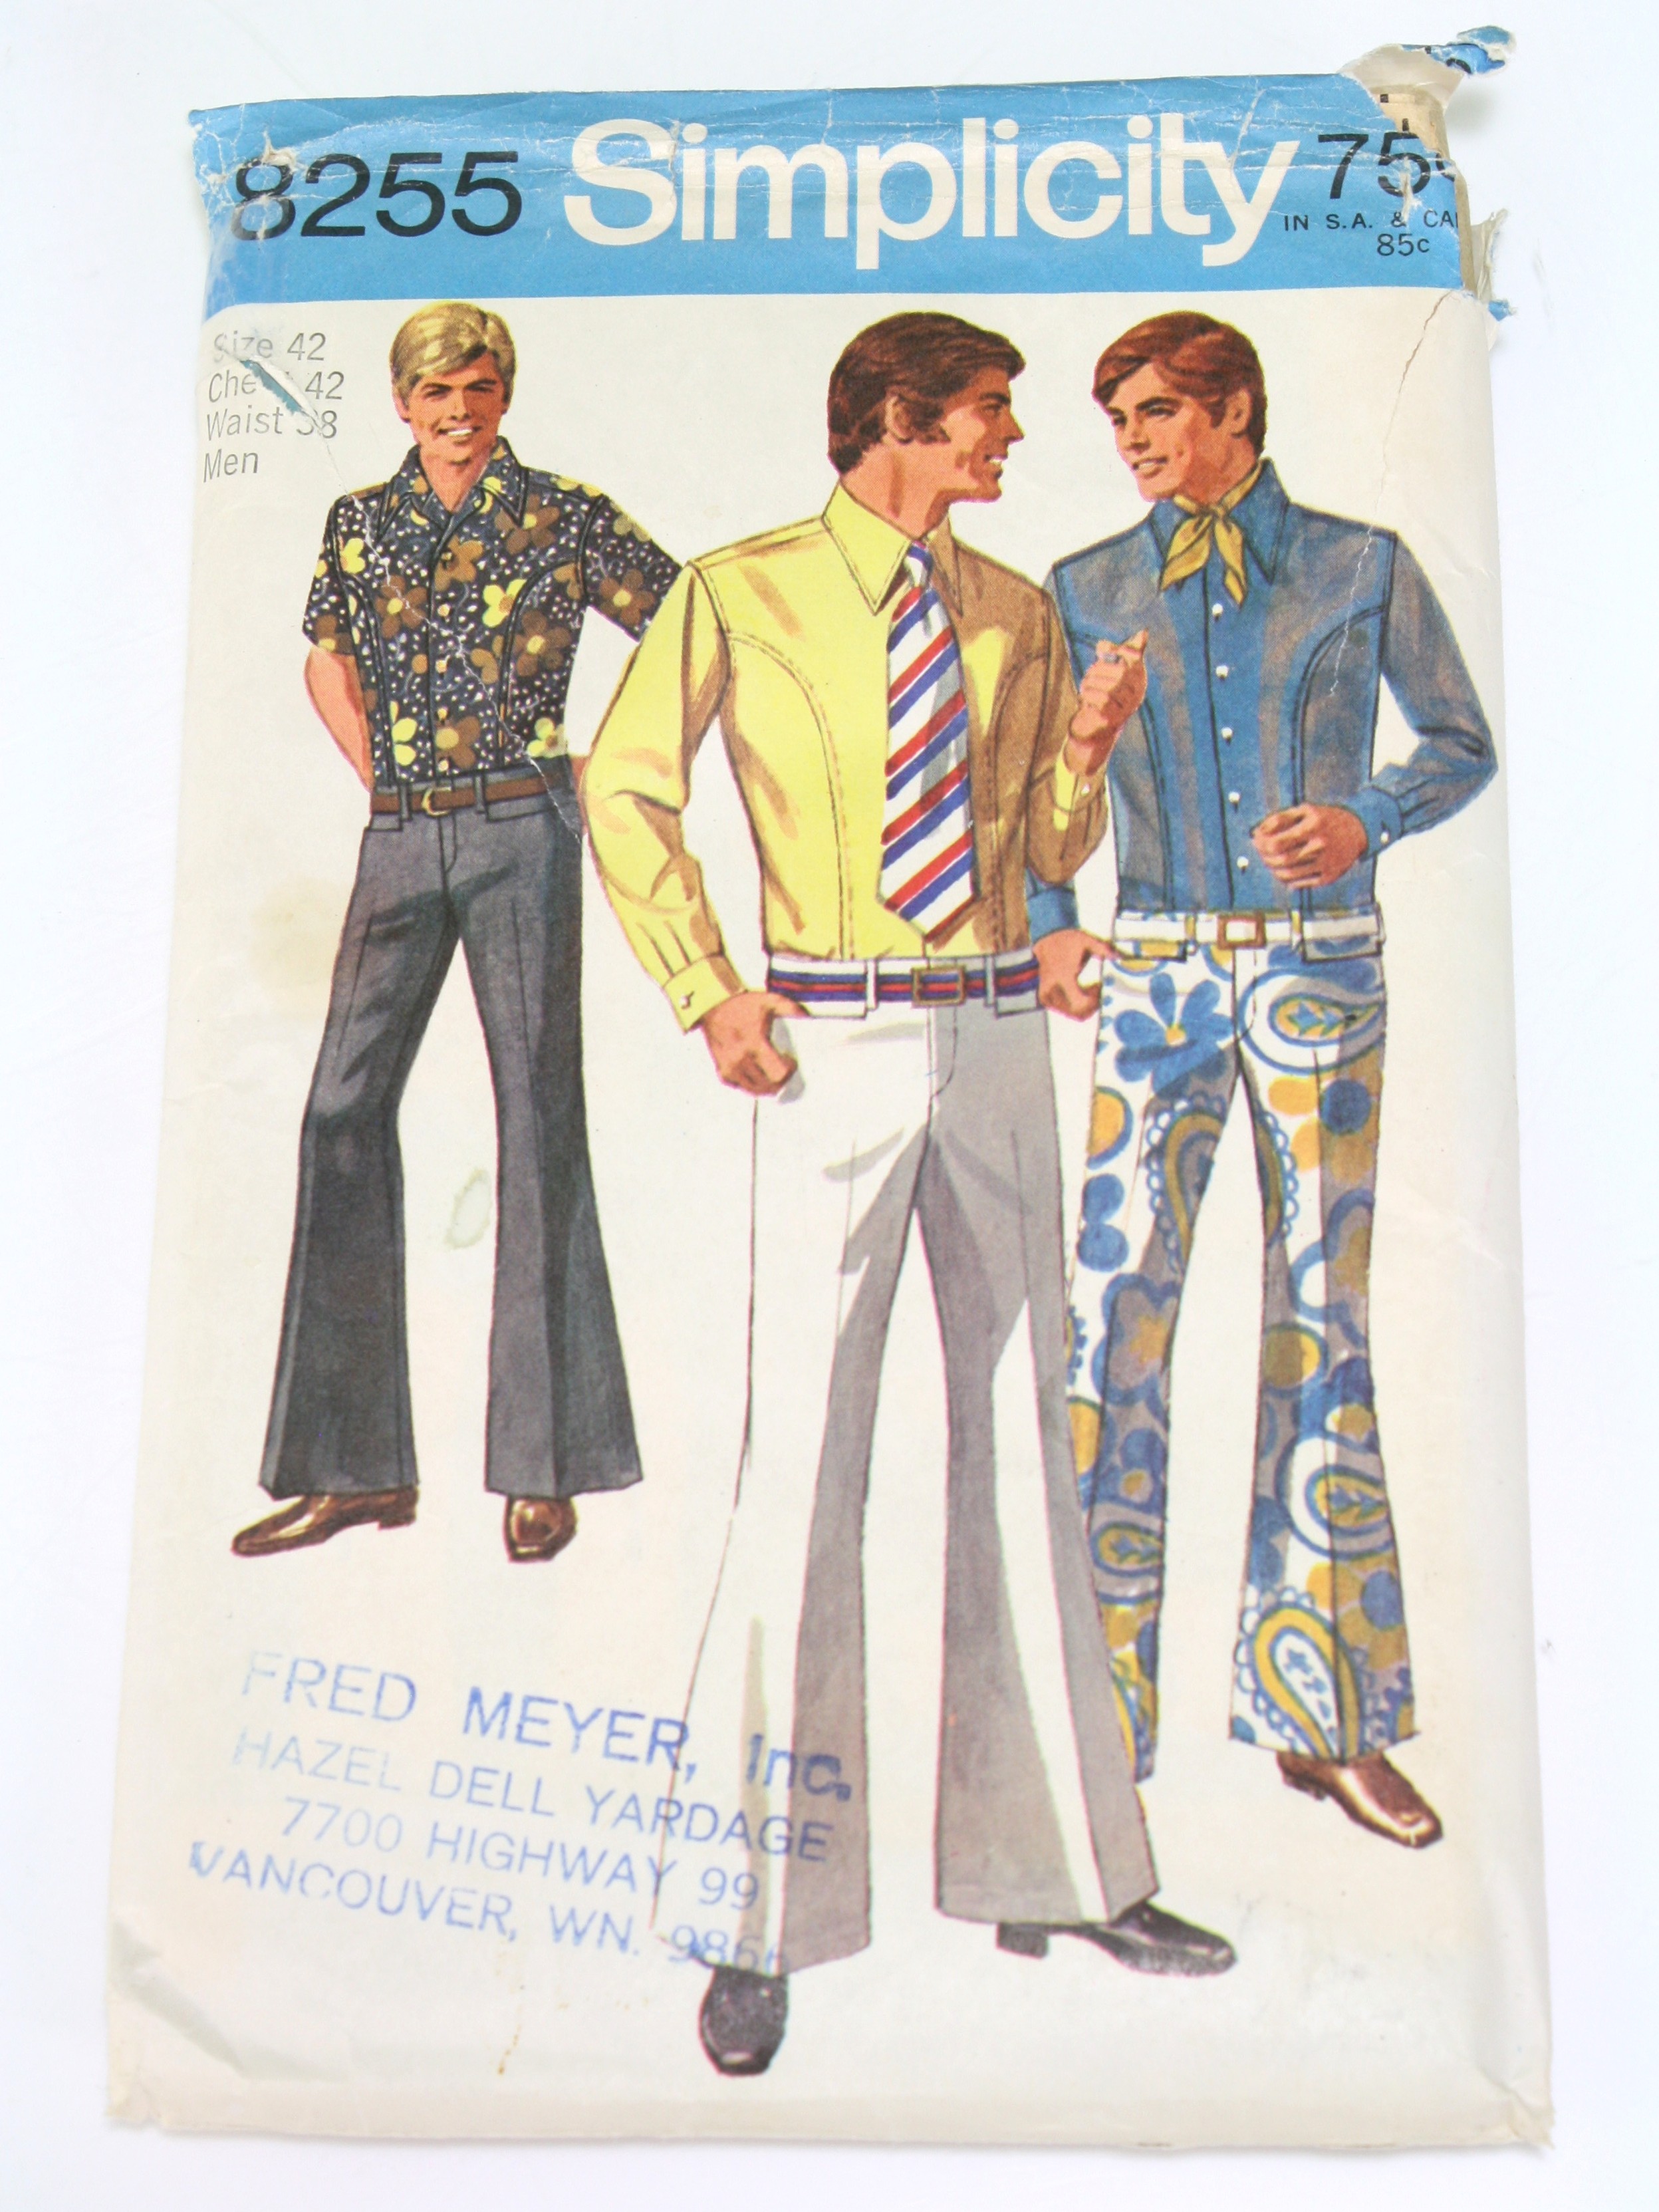 Simplicity Pattern No. 8255 60's Vintage Sewing Pattern: 60s -Simplicity  Pattern No. 8255- Mens body shirt and bell-bottom hip-hugger pants. The  stop-stitched body shirt with side front sections and back yoke has